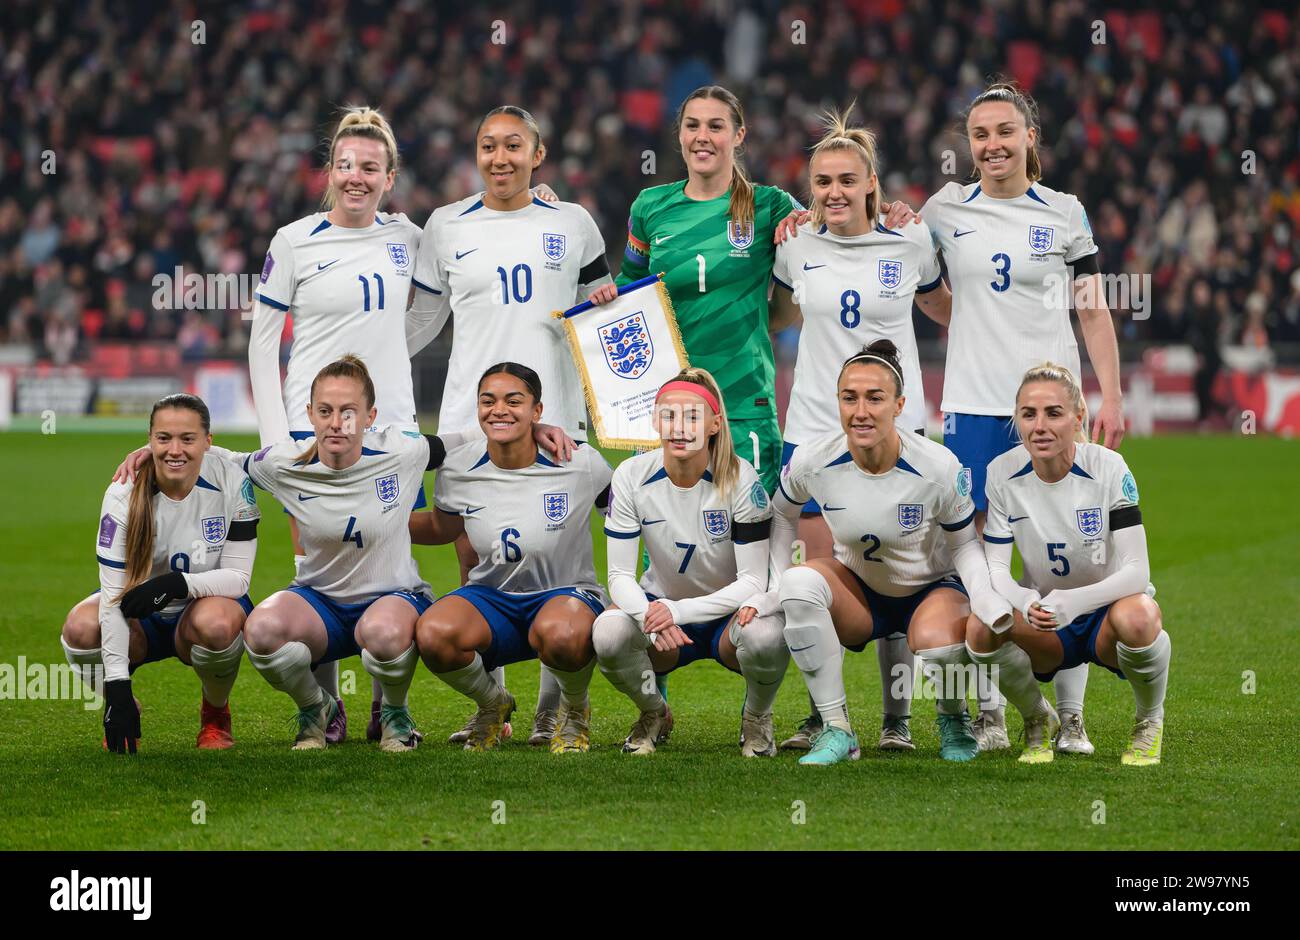 01 Dec 2023 - England v Netherlands - UEFA Womens Nations League - Wembley Stadium.  The England Women teamgroup before the Nations League match against the Nethelands. The team includes Mary Earps, Lucy Bronze, Jess Carter,  Alex Greenwood,  Niamh Charles, Georgia Stanway,  Fran Kirby, Chloe Kelly, Lauren Hemp, Lauren James, Keira Walsh Picture : Mark Pain / Alamy Live News Stock Photo